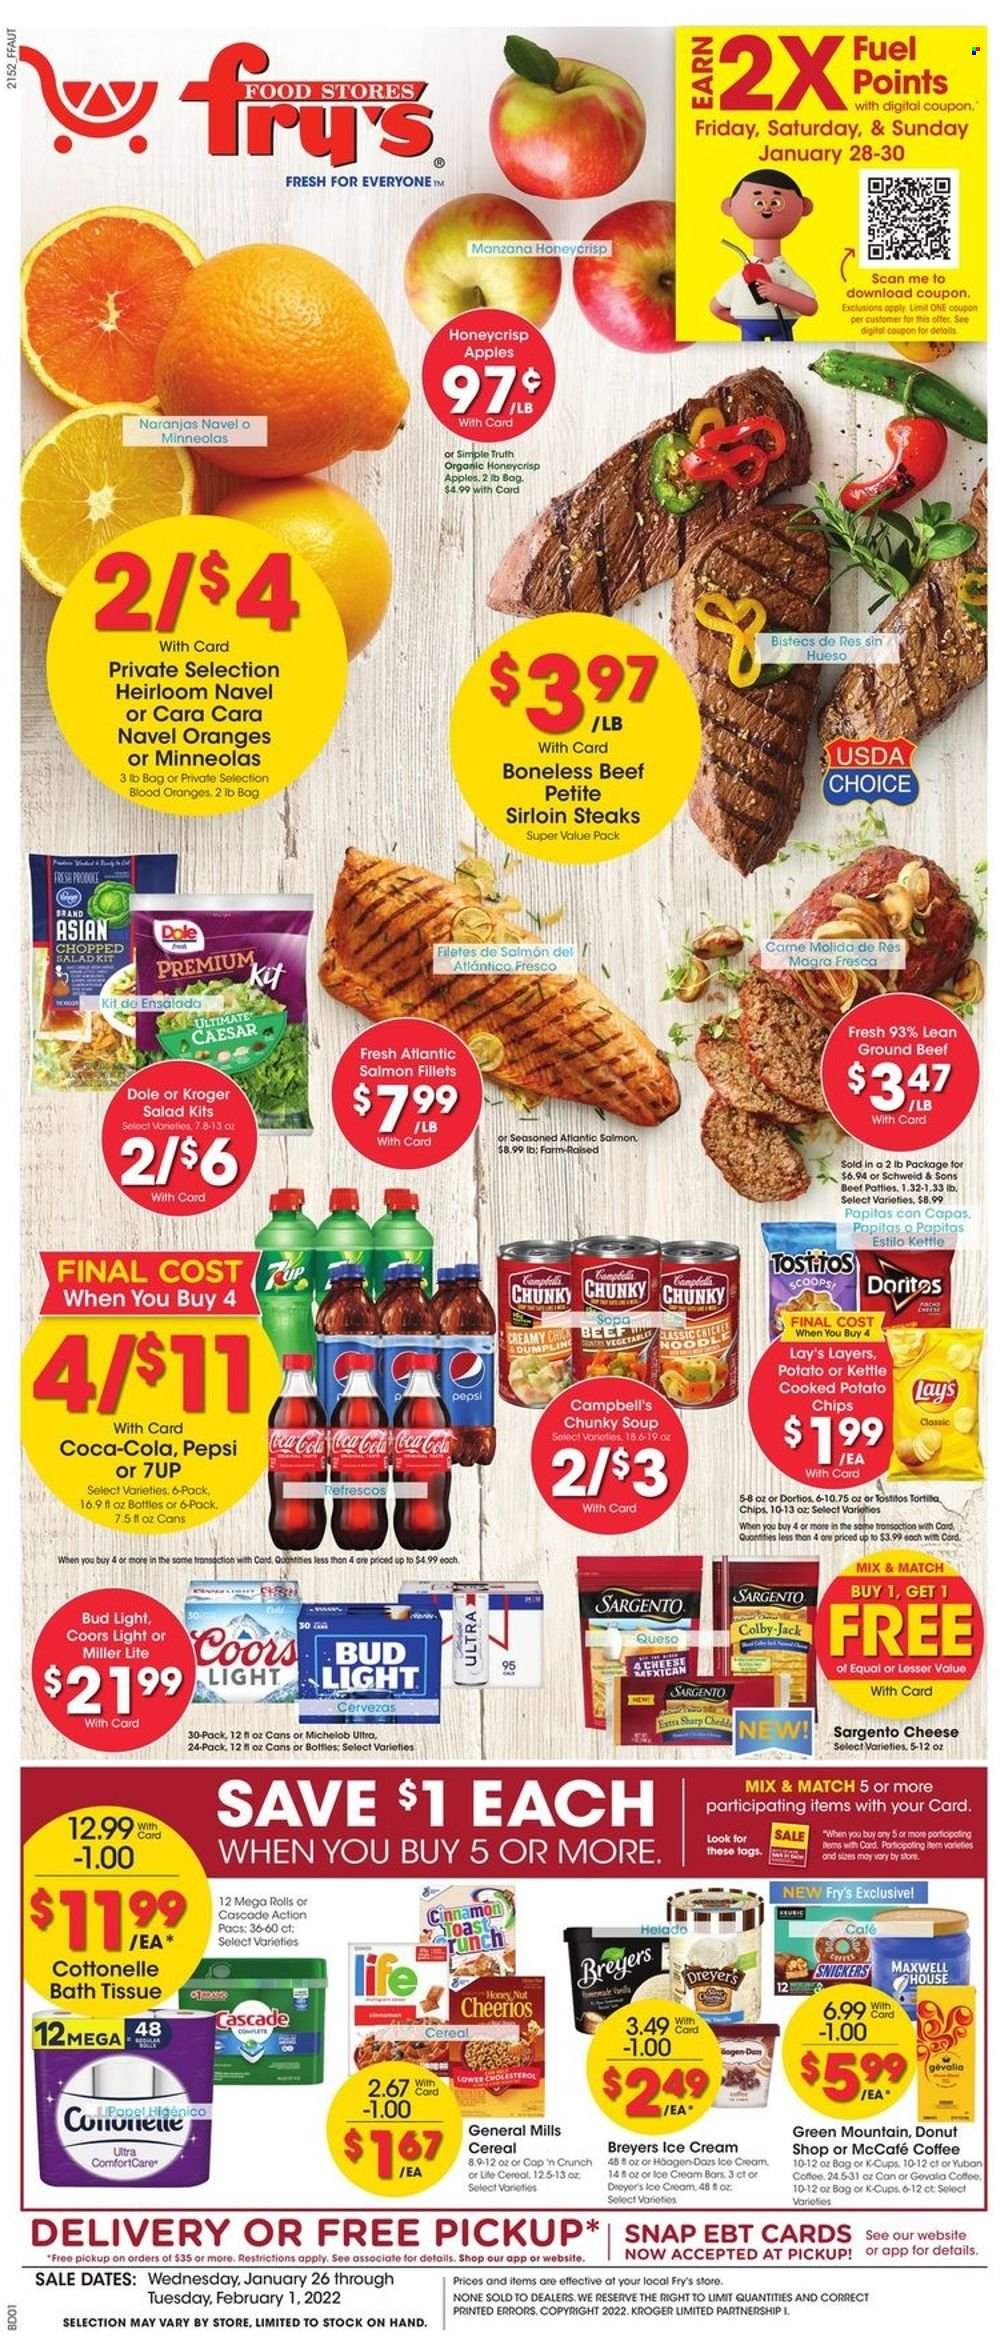 thumbnail - Fry’s Flyer - 01/26/2022 - 02/01/2022 - Sales products - donut, salad, Dole, apples, oranges, salmon, salmon fillet, Campbell's, soup, dumplings, Colby cheese, cheese, Sargento, ice cream, Doritos, chips, Lay’s, kettle, Tostitos, cereals, Cheerios, cinnamon, Coca-Cola, Pepsi, 7UP, coffee, coffee capsules, McCafe, K-Cups, Gevalia, Green Mountain, beer, Bud Light, beef meat, ground beef, steak, sirloin steak, bath tissue, Cottonelle, Cascade, Miller Lite, Coors, Michelob, navel oranges. Page 1.